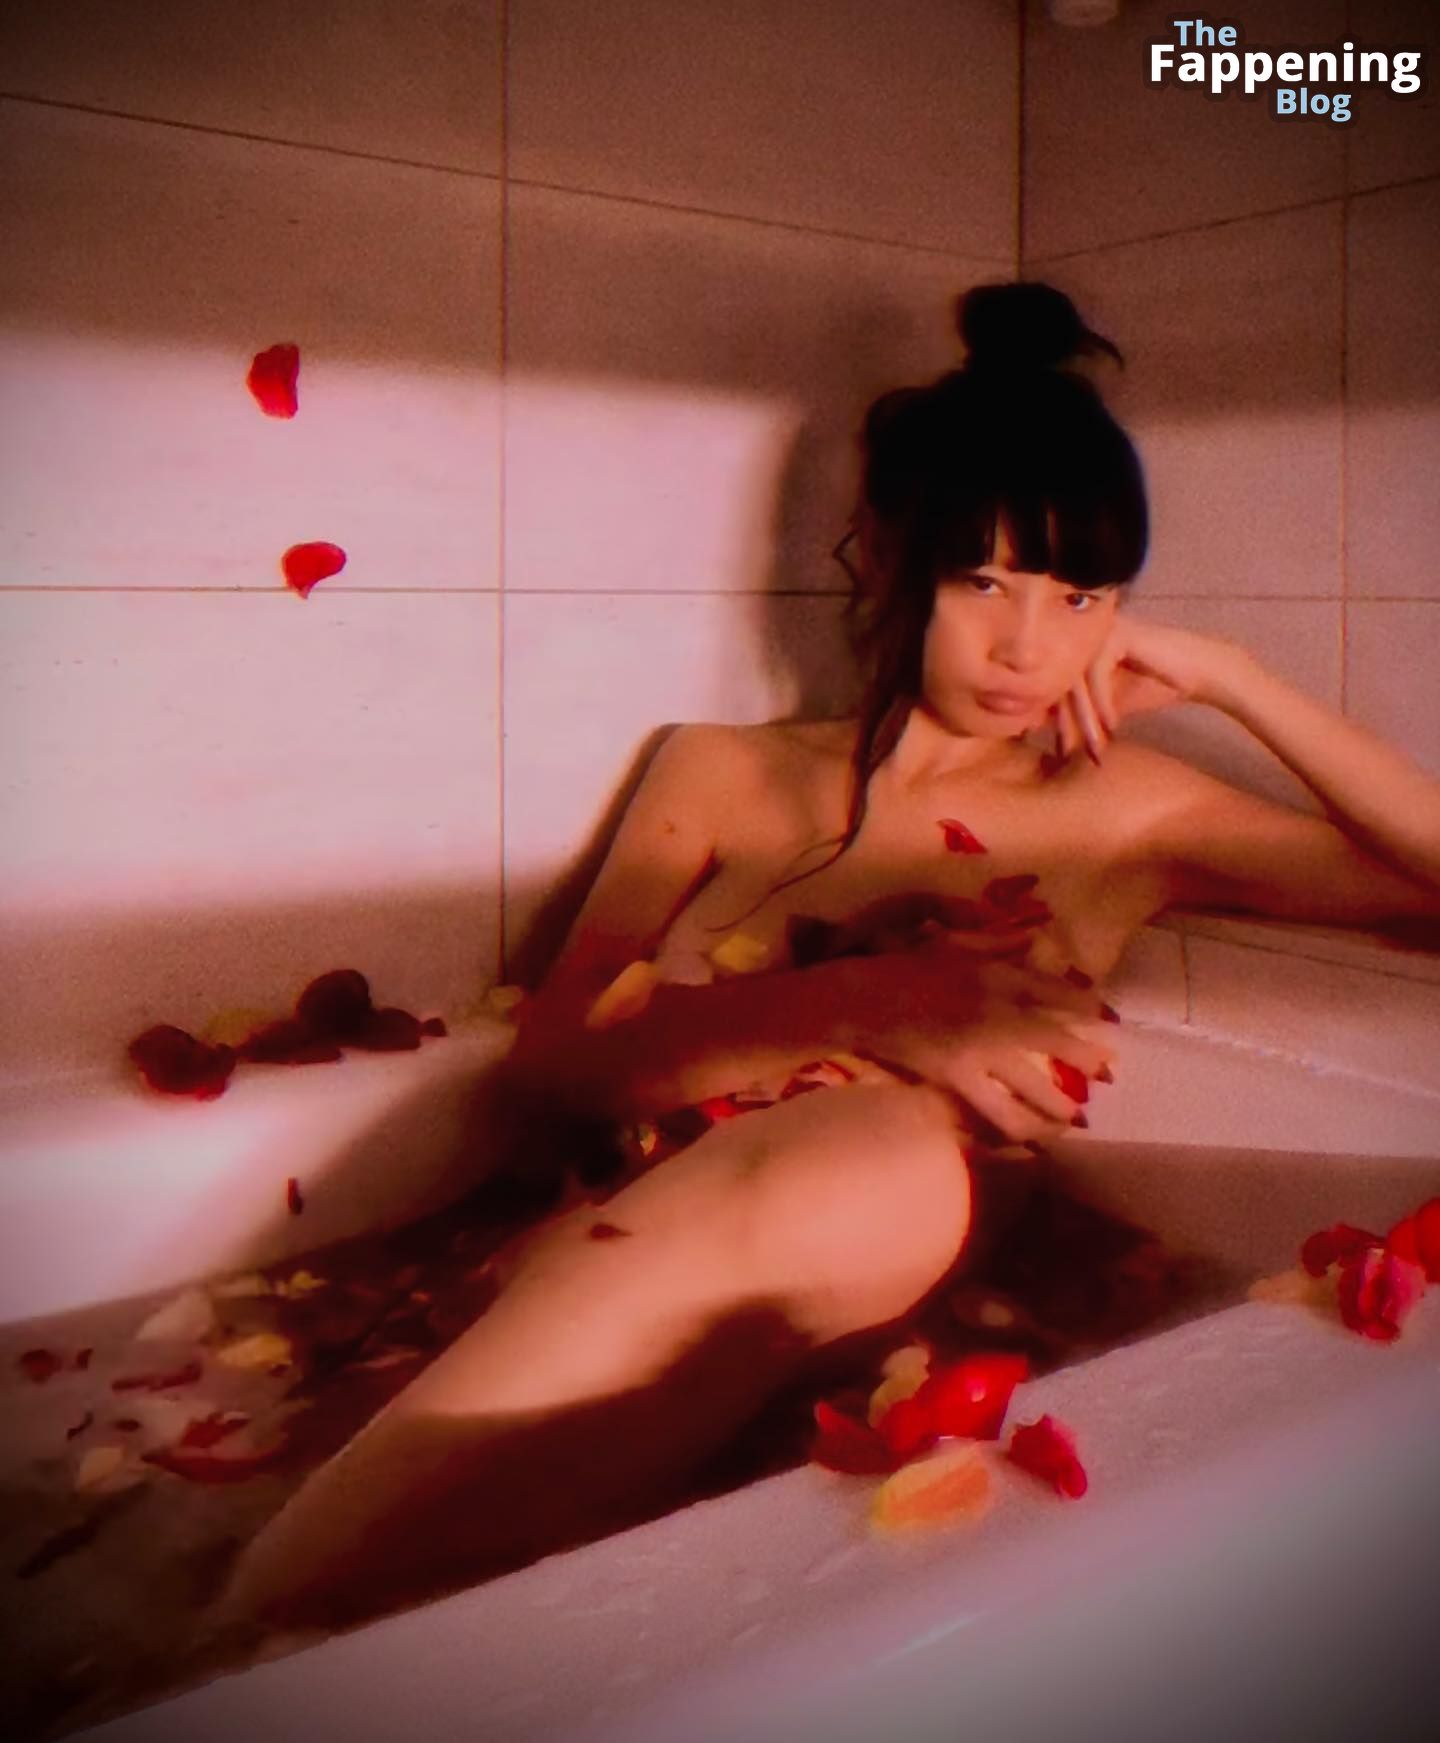 Bai-Ling-Nude-22-The-Fappening-Blog.jpg